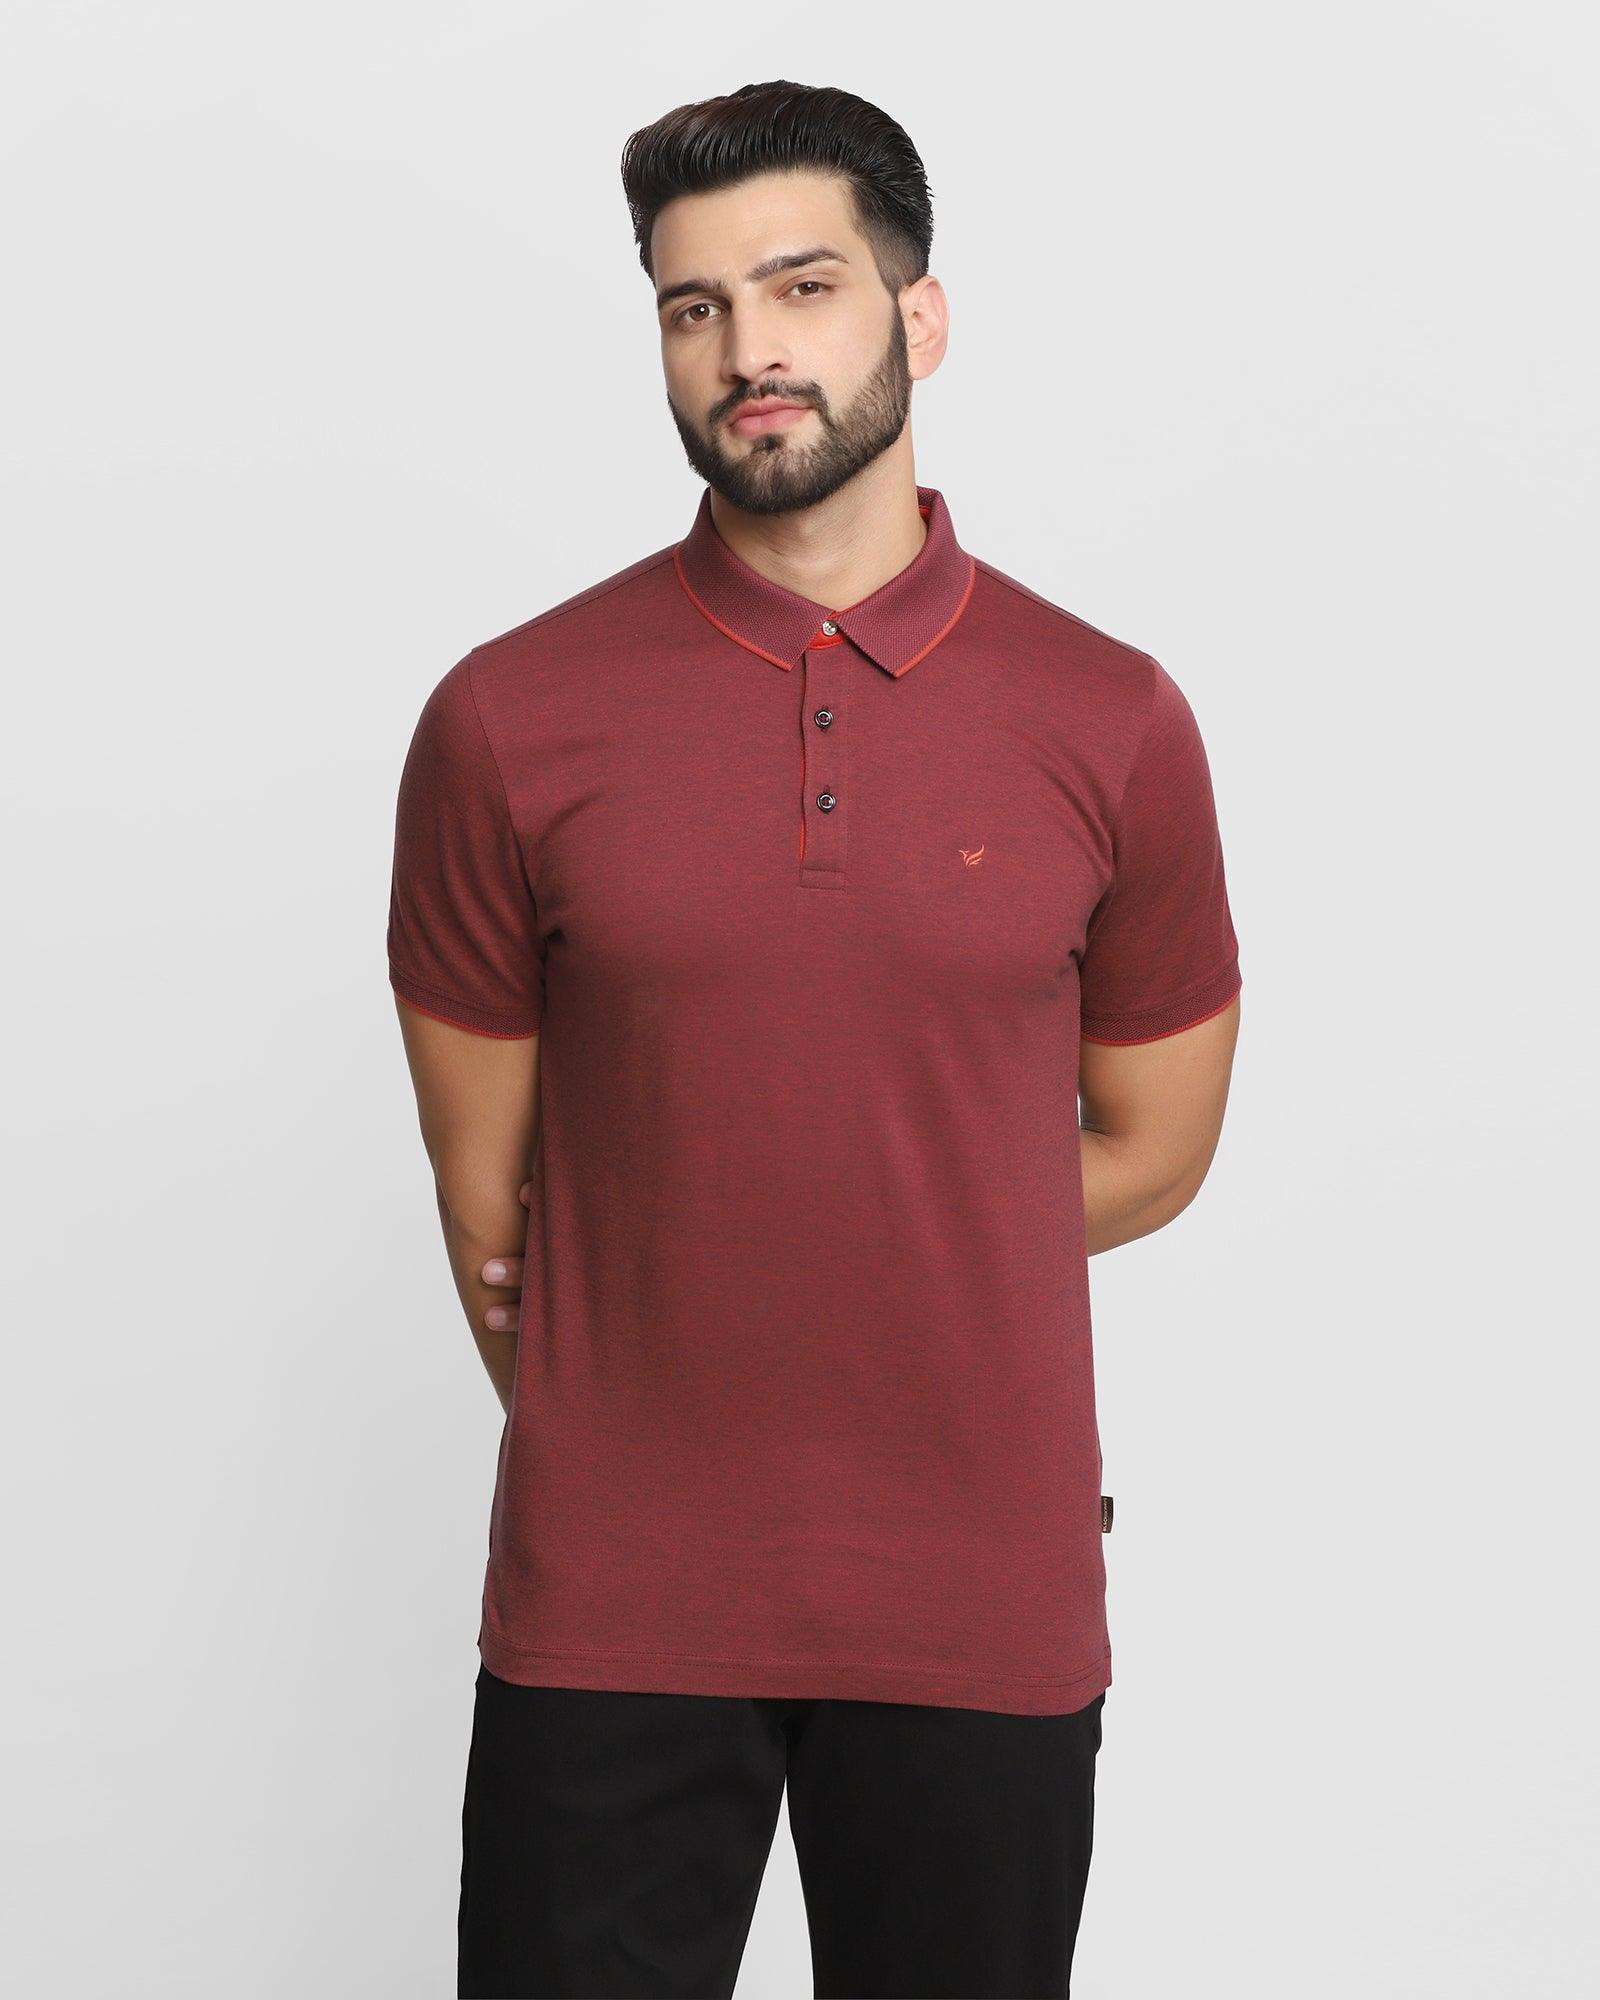 Polo Rust Solid T Shirt - Tone